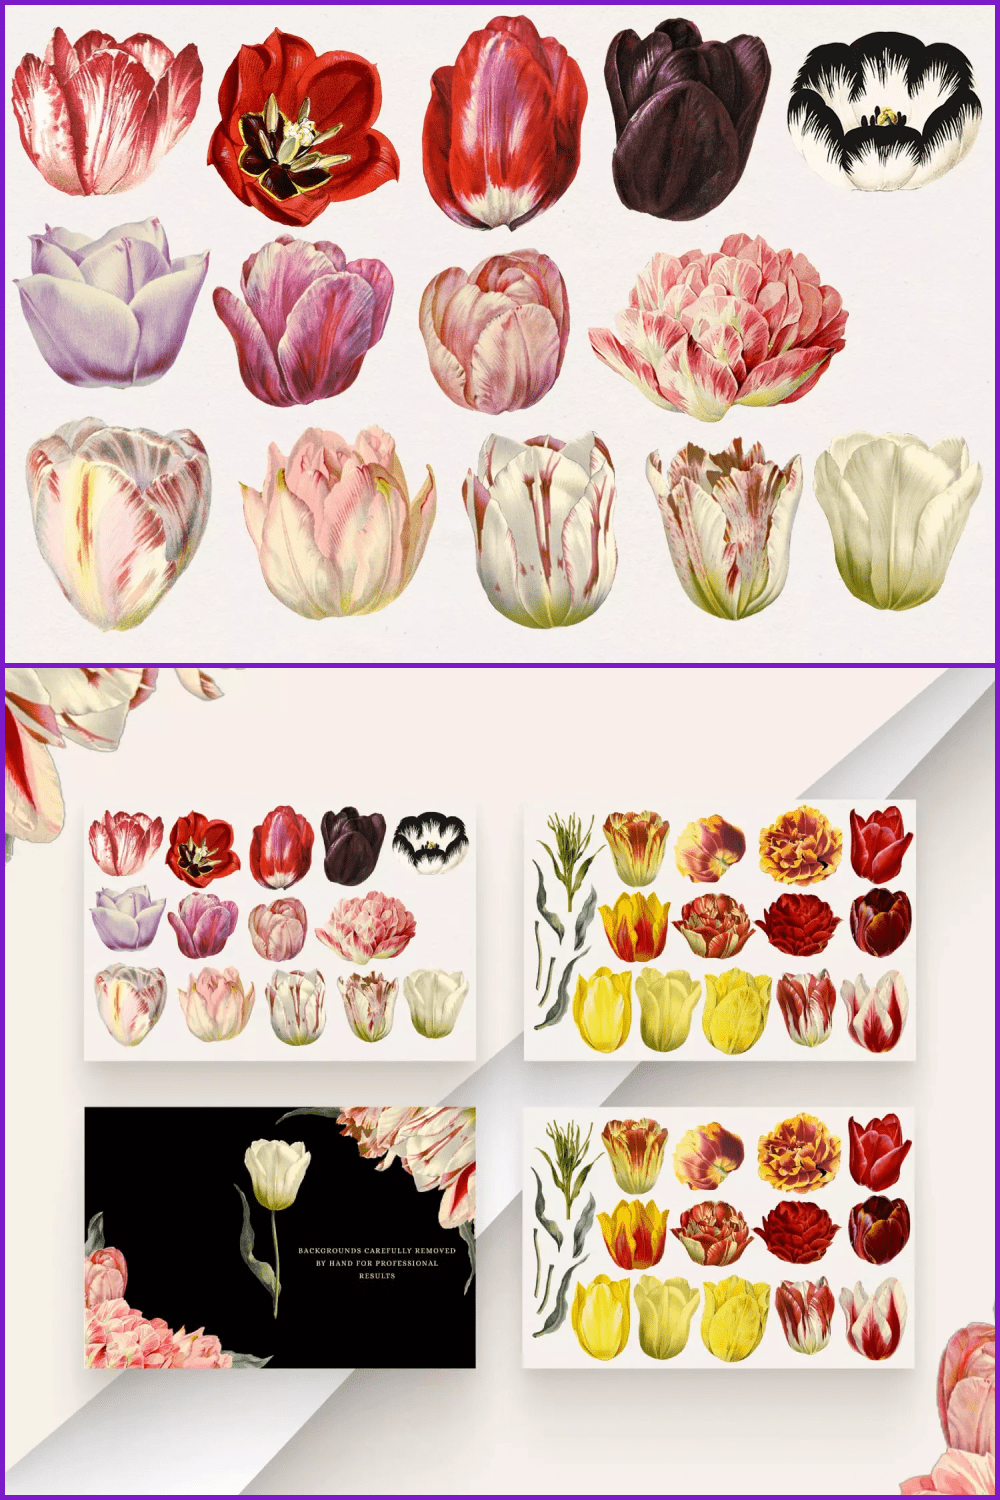 Tulip heads in different colors.